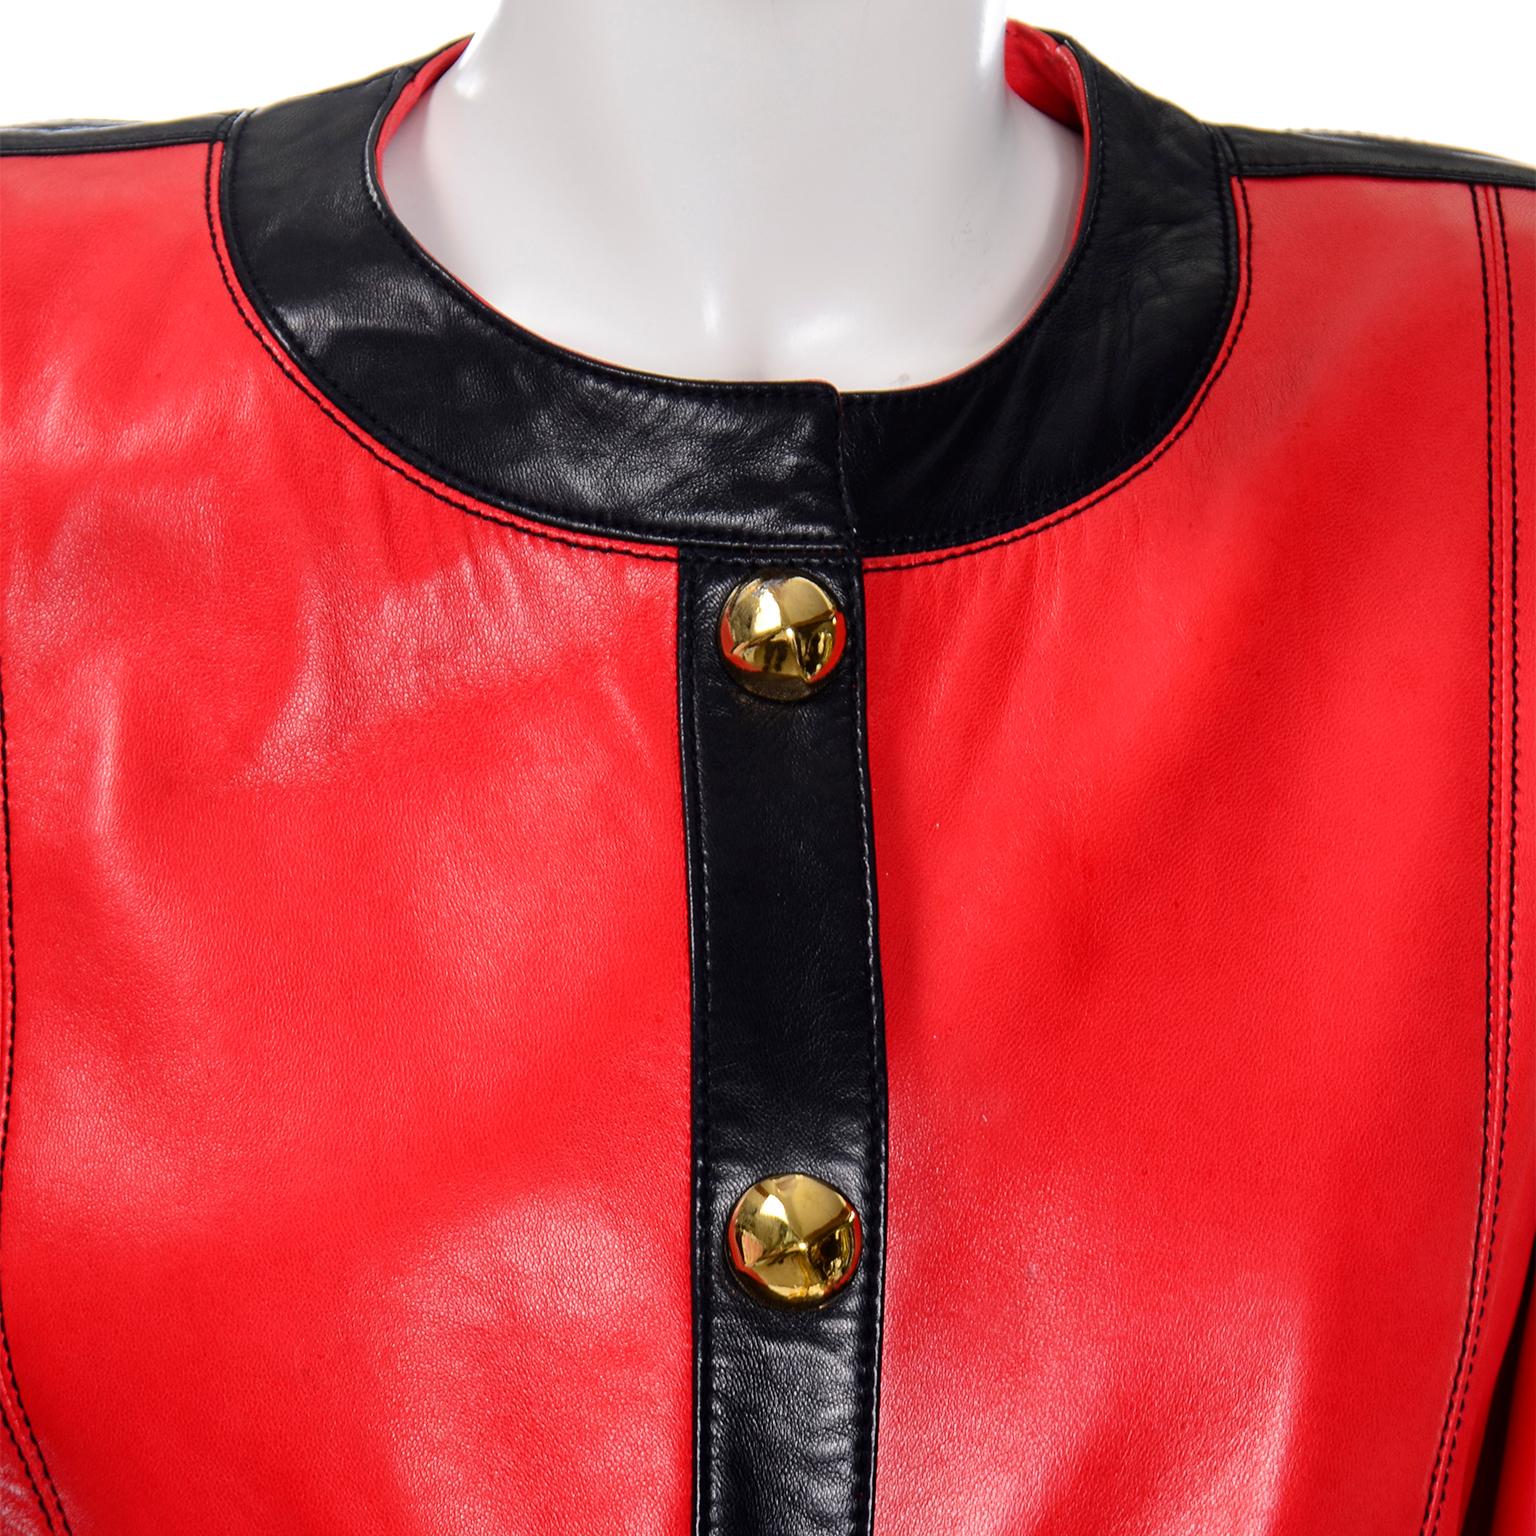 Women's Vintage Escada Red and Black Leather Jacket With Gold Studs by Margaretha Ley